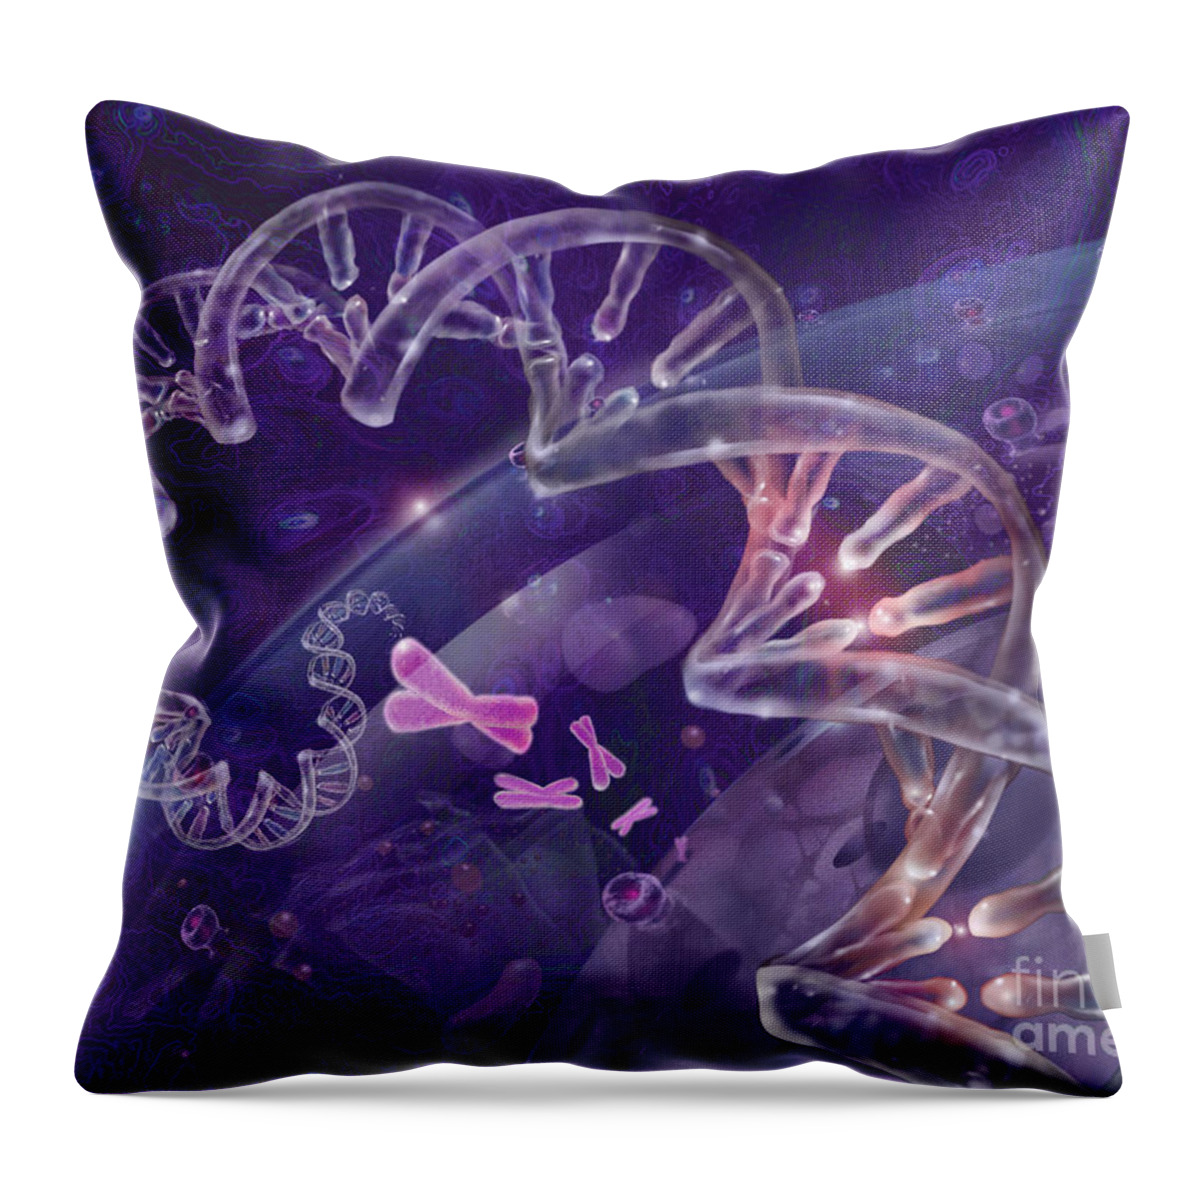 Dna Throw Pillow featuring the photograph Cellular Dna #1 by Jim Dowdalls